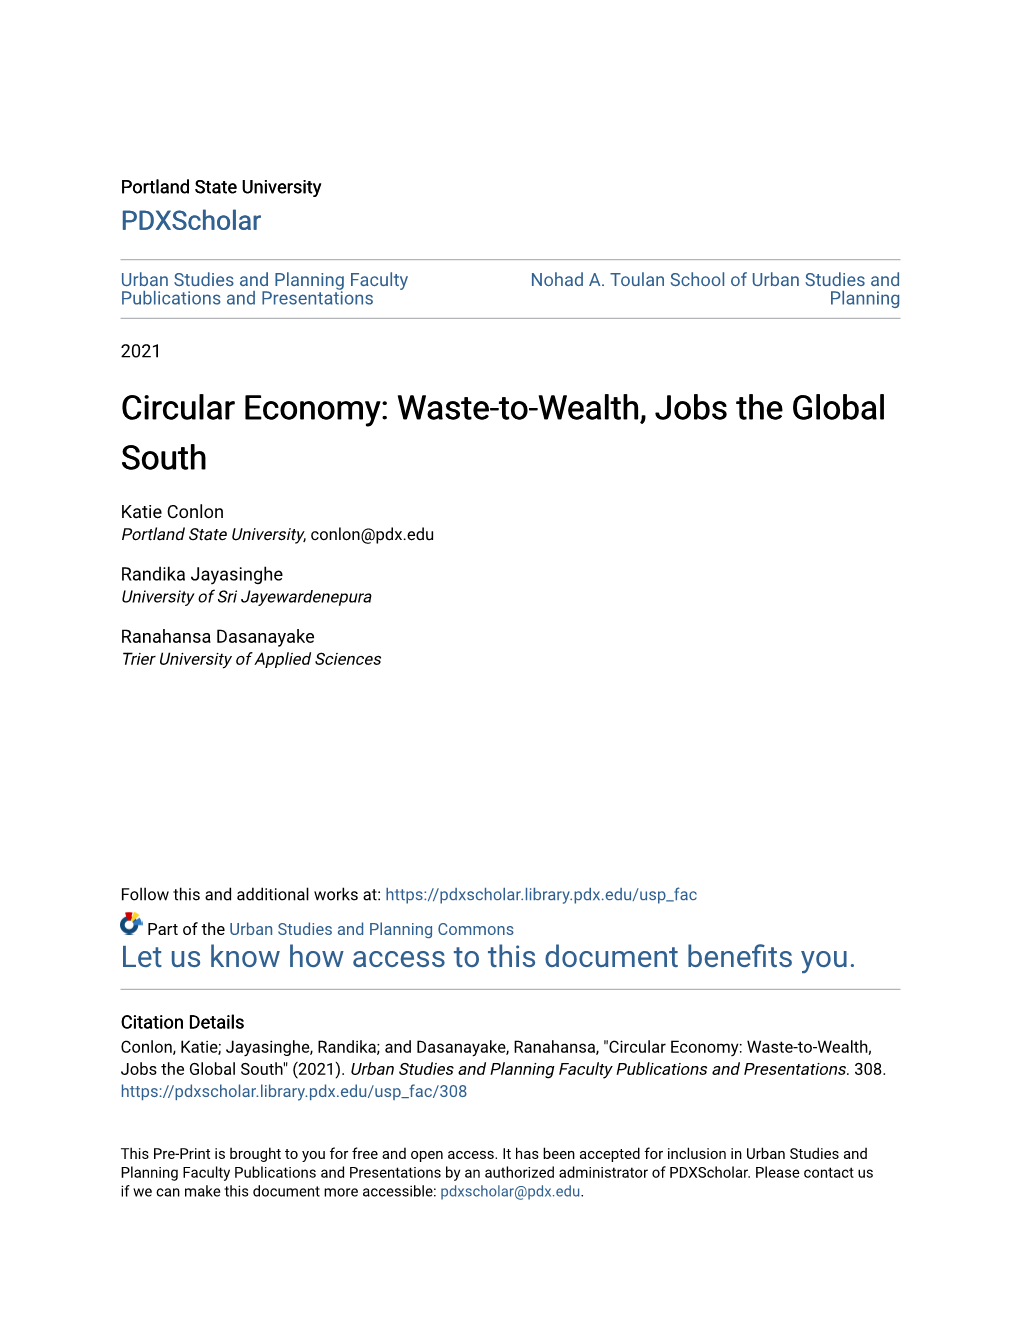 Circular Economy: Waste-To-Wealth, Jobs the Global South